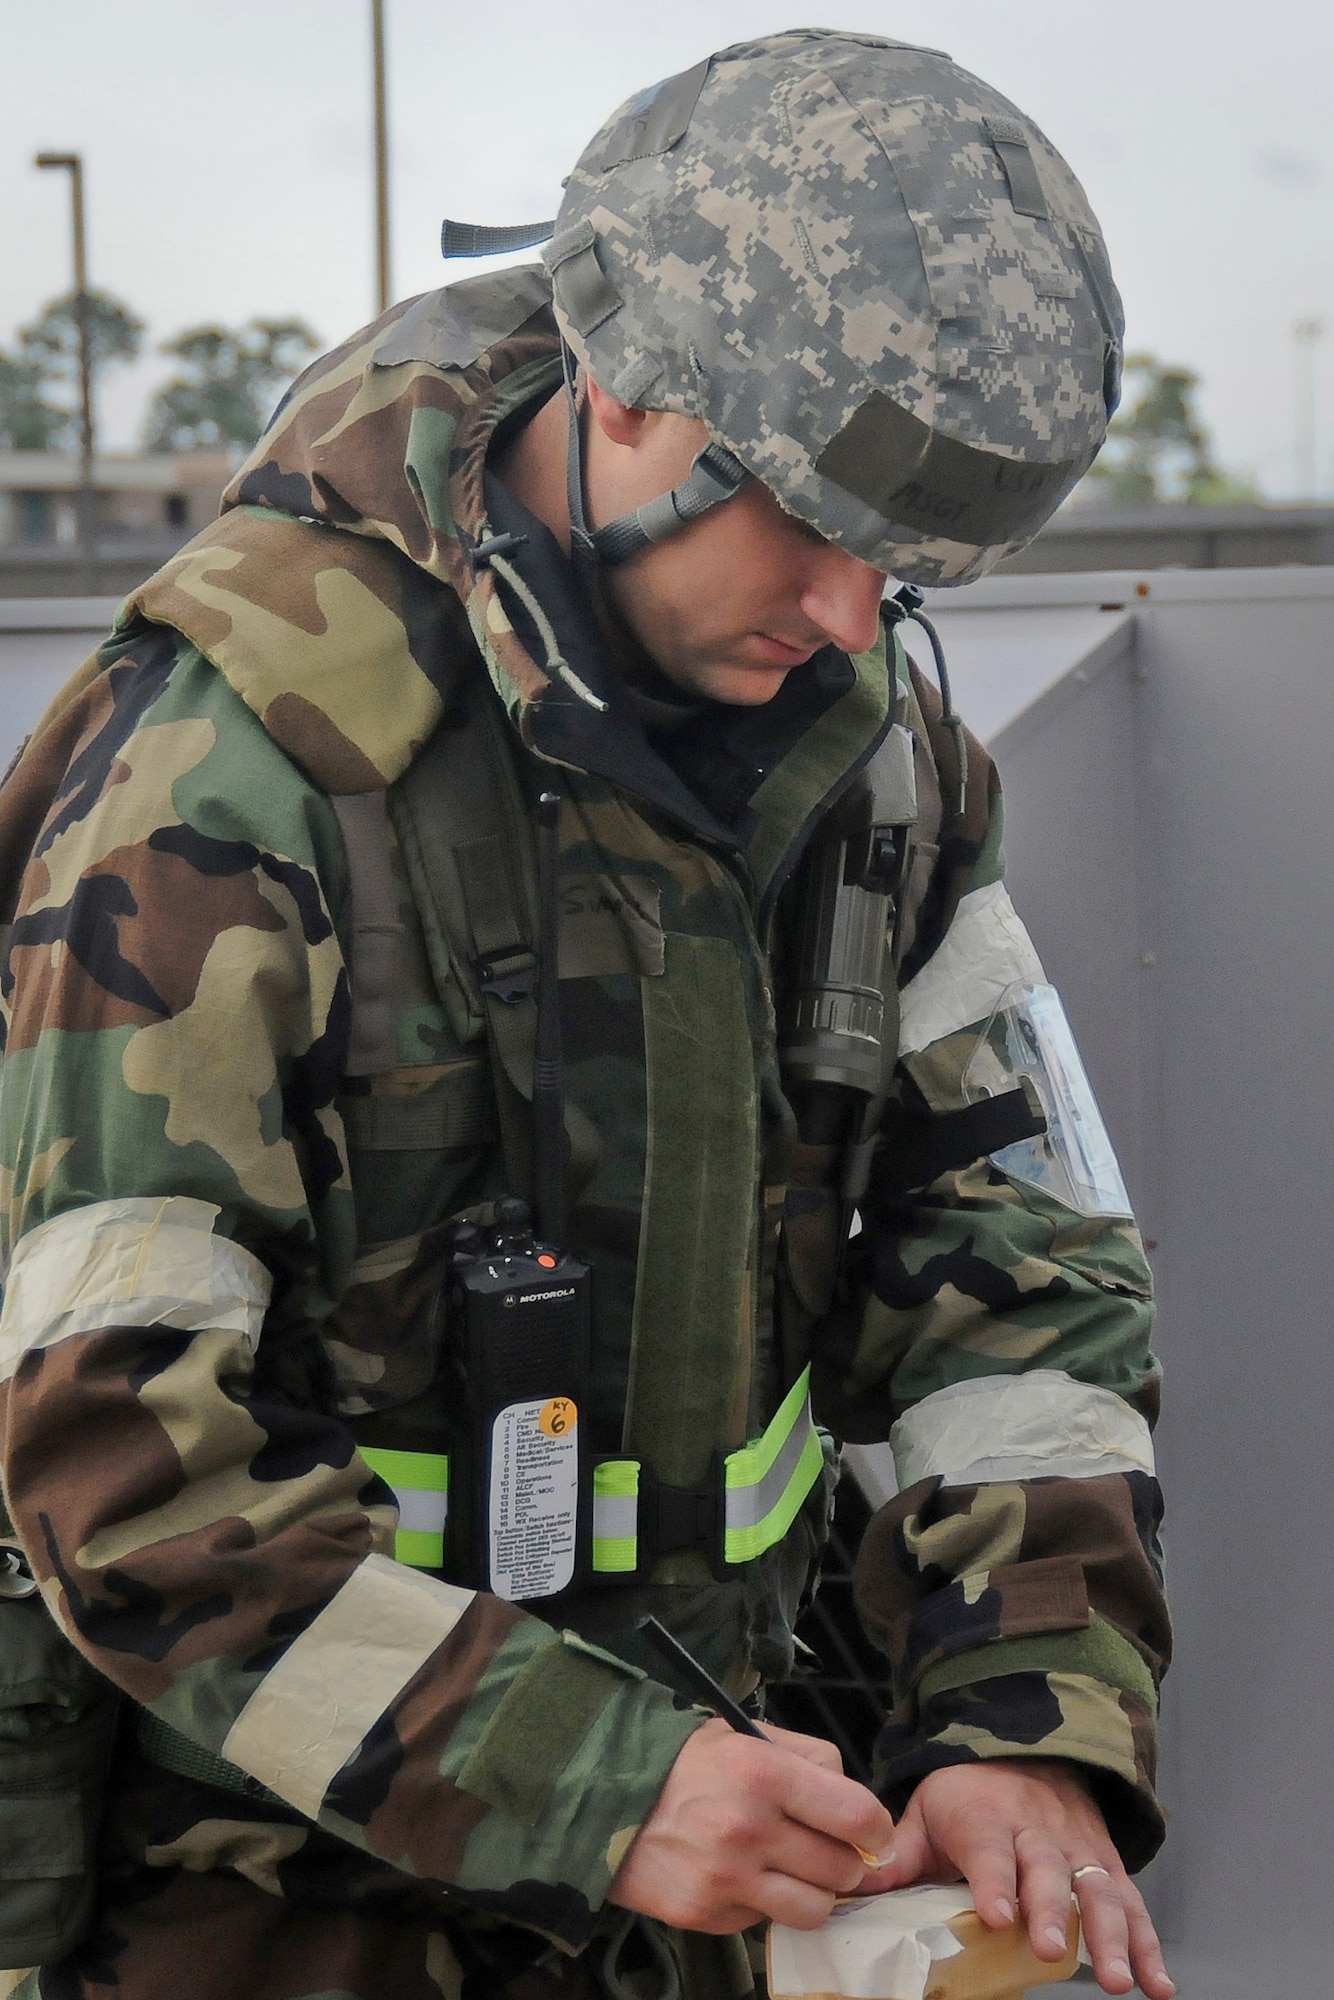 An Air Force Post-Attack Reconnaissance Team member from the 123rd Airlift Wing inspects chemical detection devices in his perimeter on May 19, 2010 at the Gulfport Combat Readiness Training Center in Gulfport, Miss. The unit was participating in an Air Mobility Command Operational Readiness Inspection. (U.S. Air Force photo/Tech. Sgt. Dennis Flora) (Released)